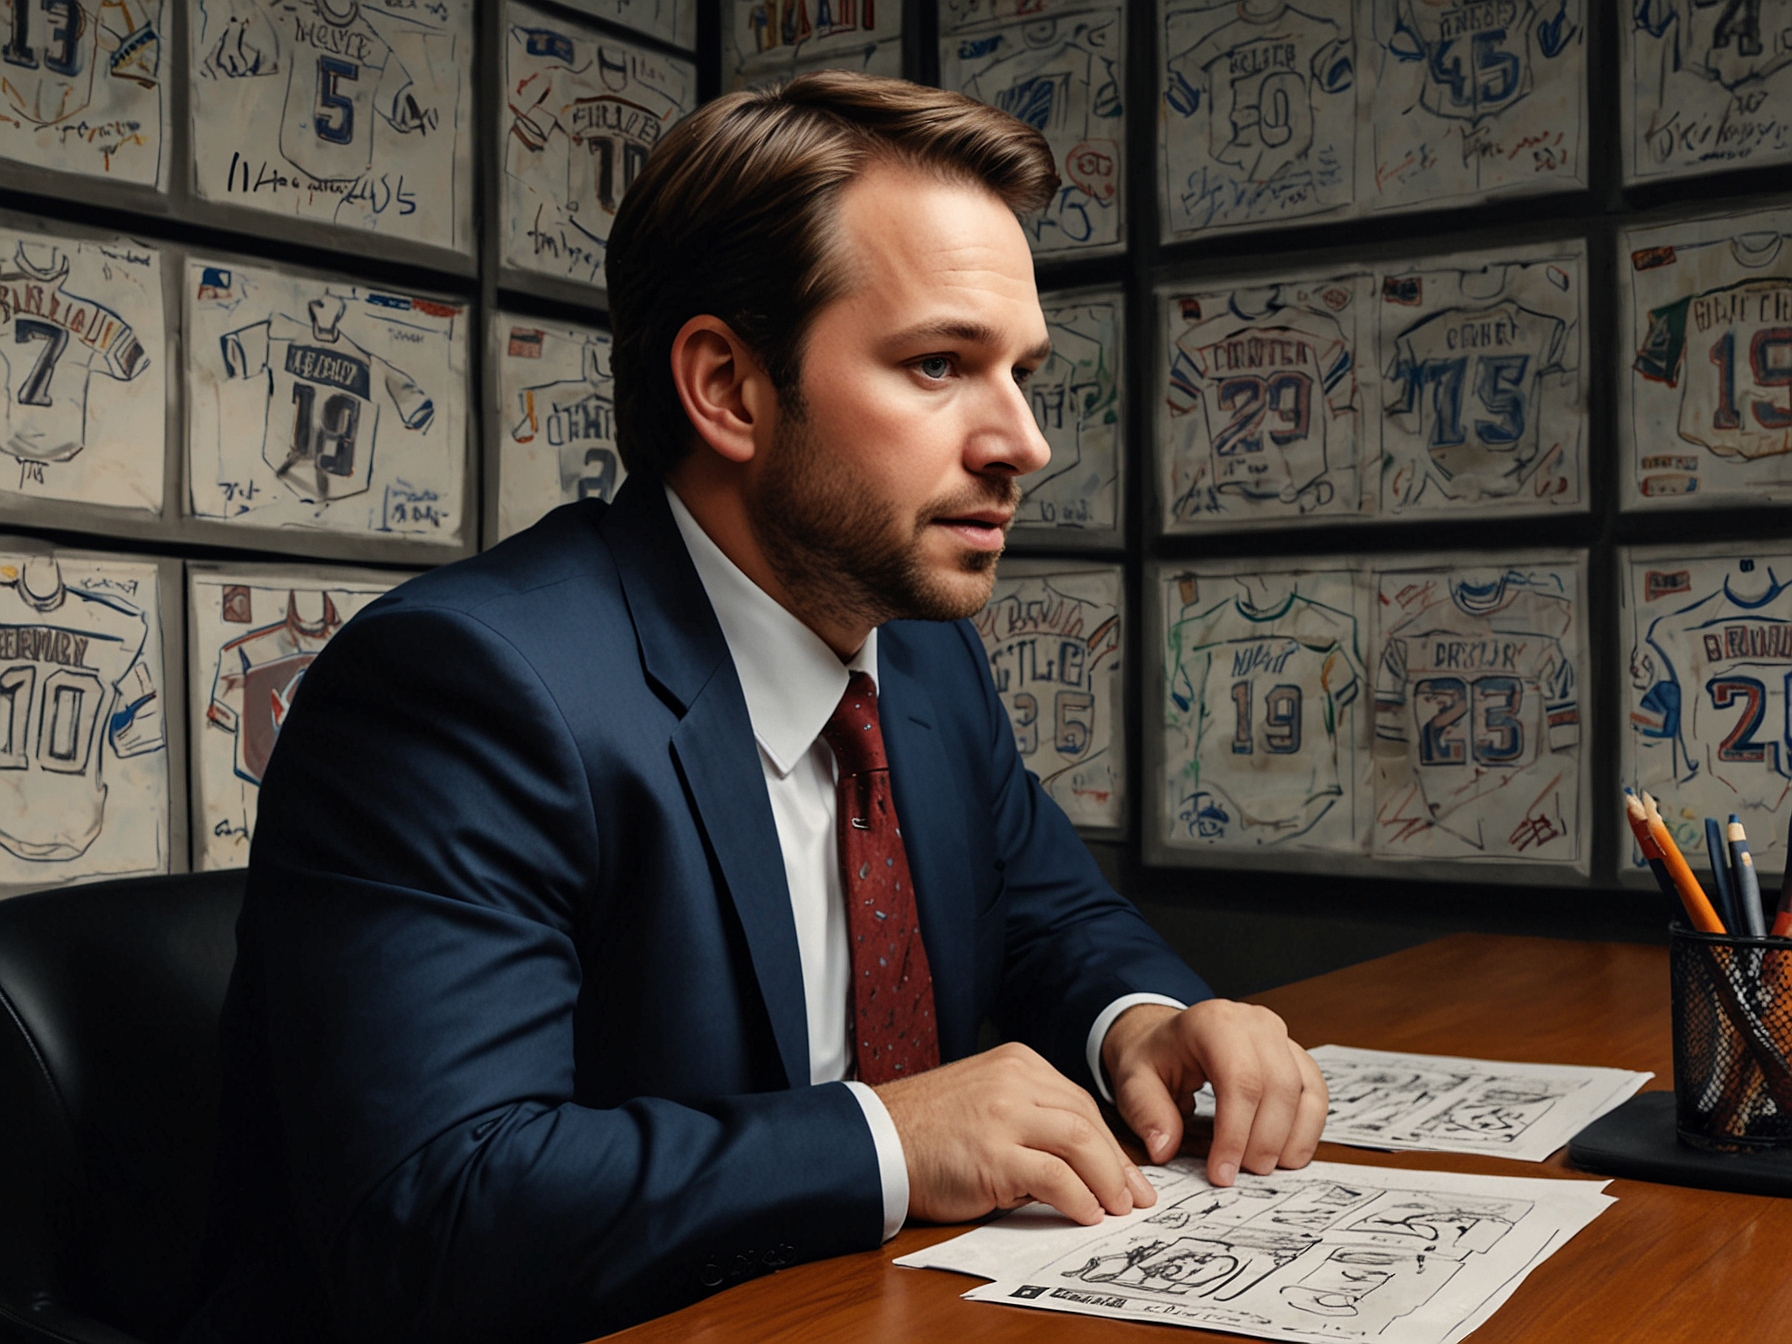 Illustration of the New York Rangers' General Manager Chris Drury looking at potential free agents, emphasizing the strategic planning behind the team's roster enhancement.